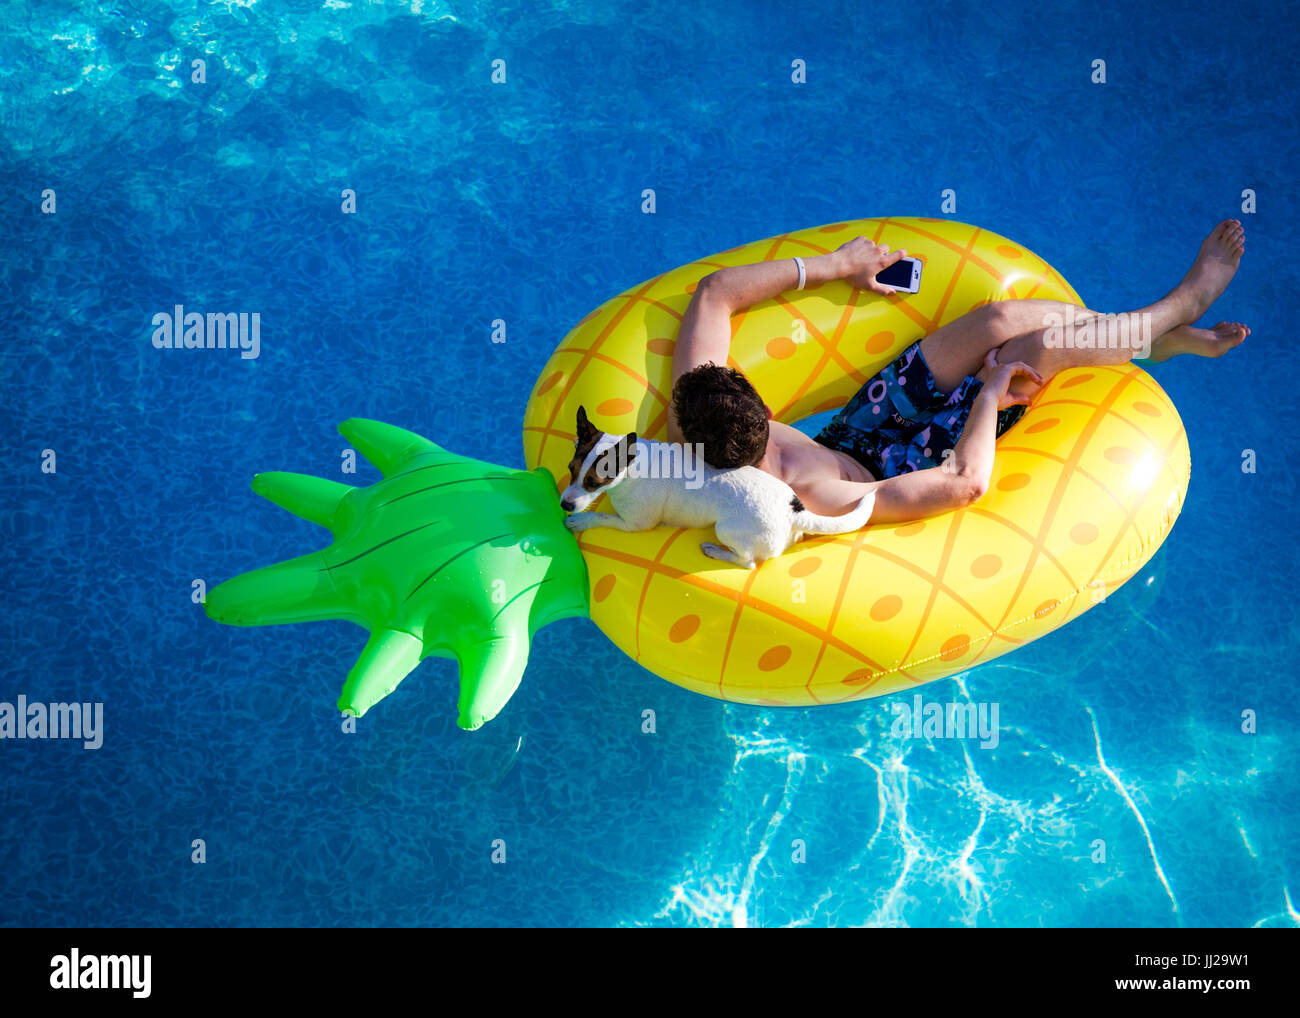 Teenage boy and Jack Russell Terrier dog relaxing while floating on a pineapple shaped pool toy in an outdoor swimming pool. Stock Photo